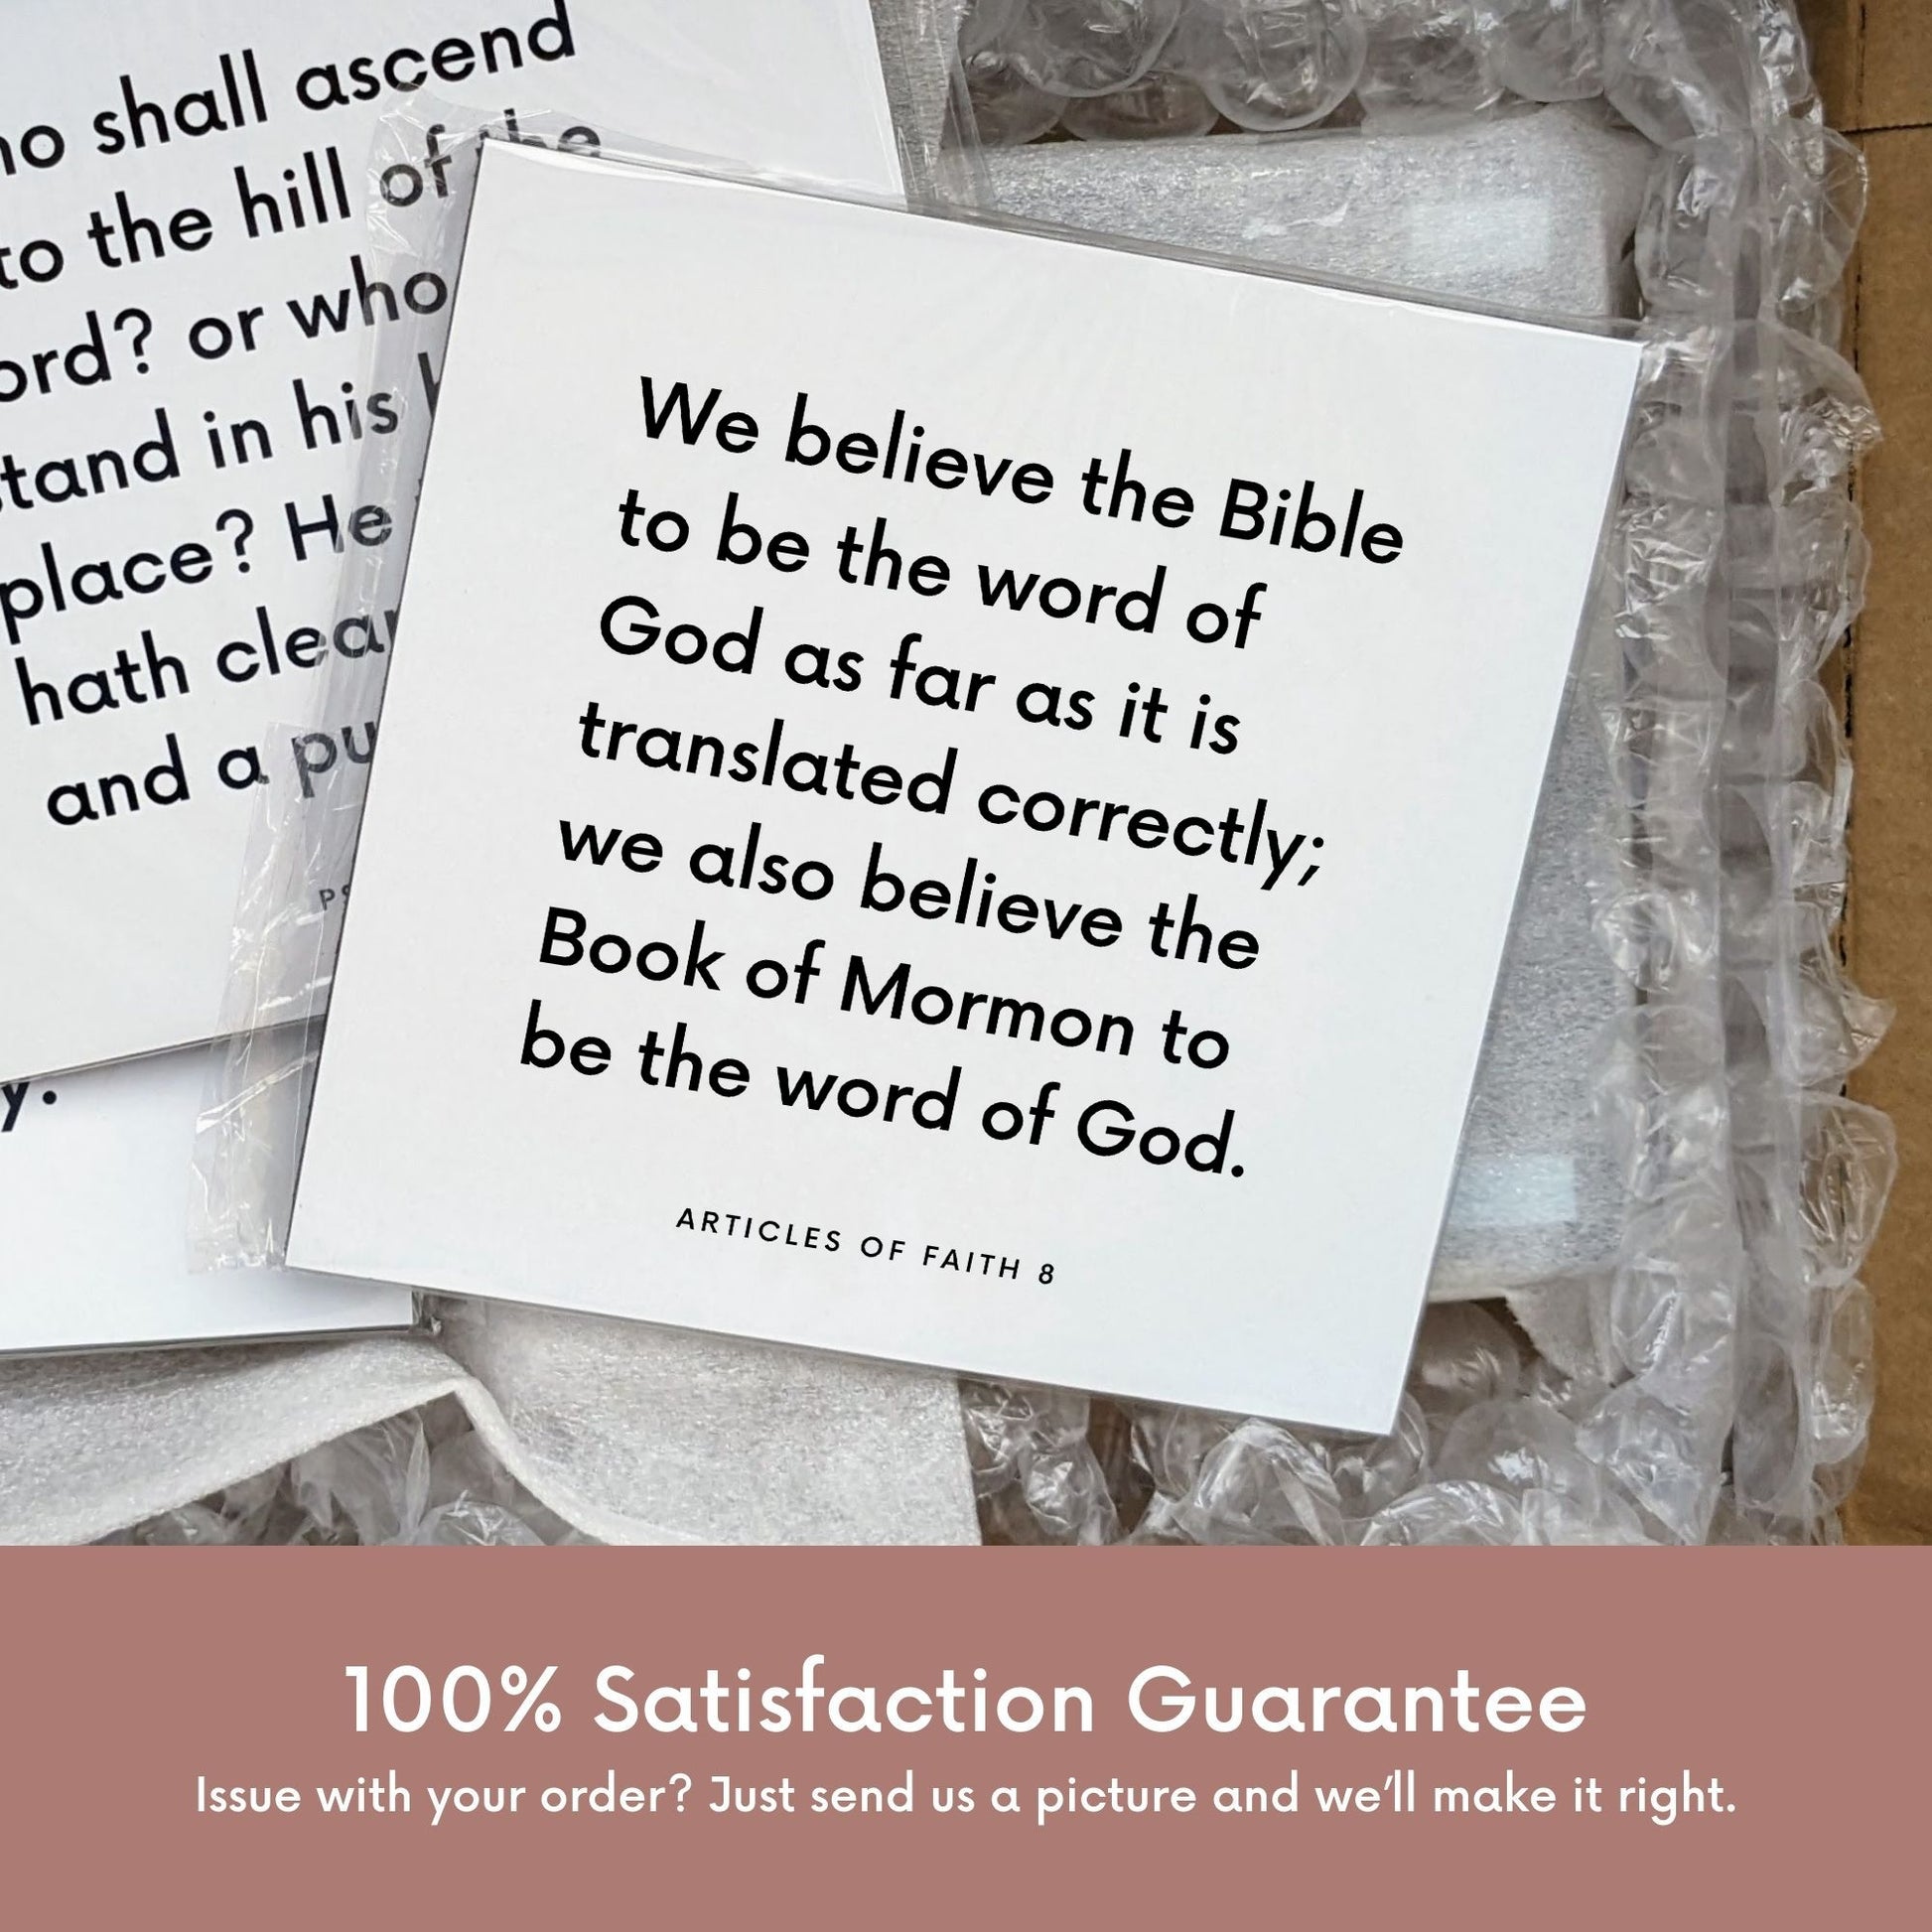 Shipping materials for scripture tile of Articles of Faith 8 - "We believe the Bible to be the word of God"